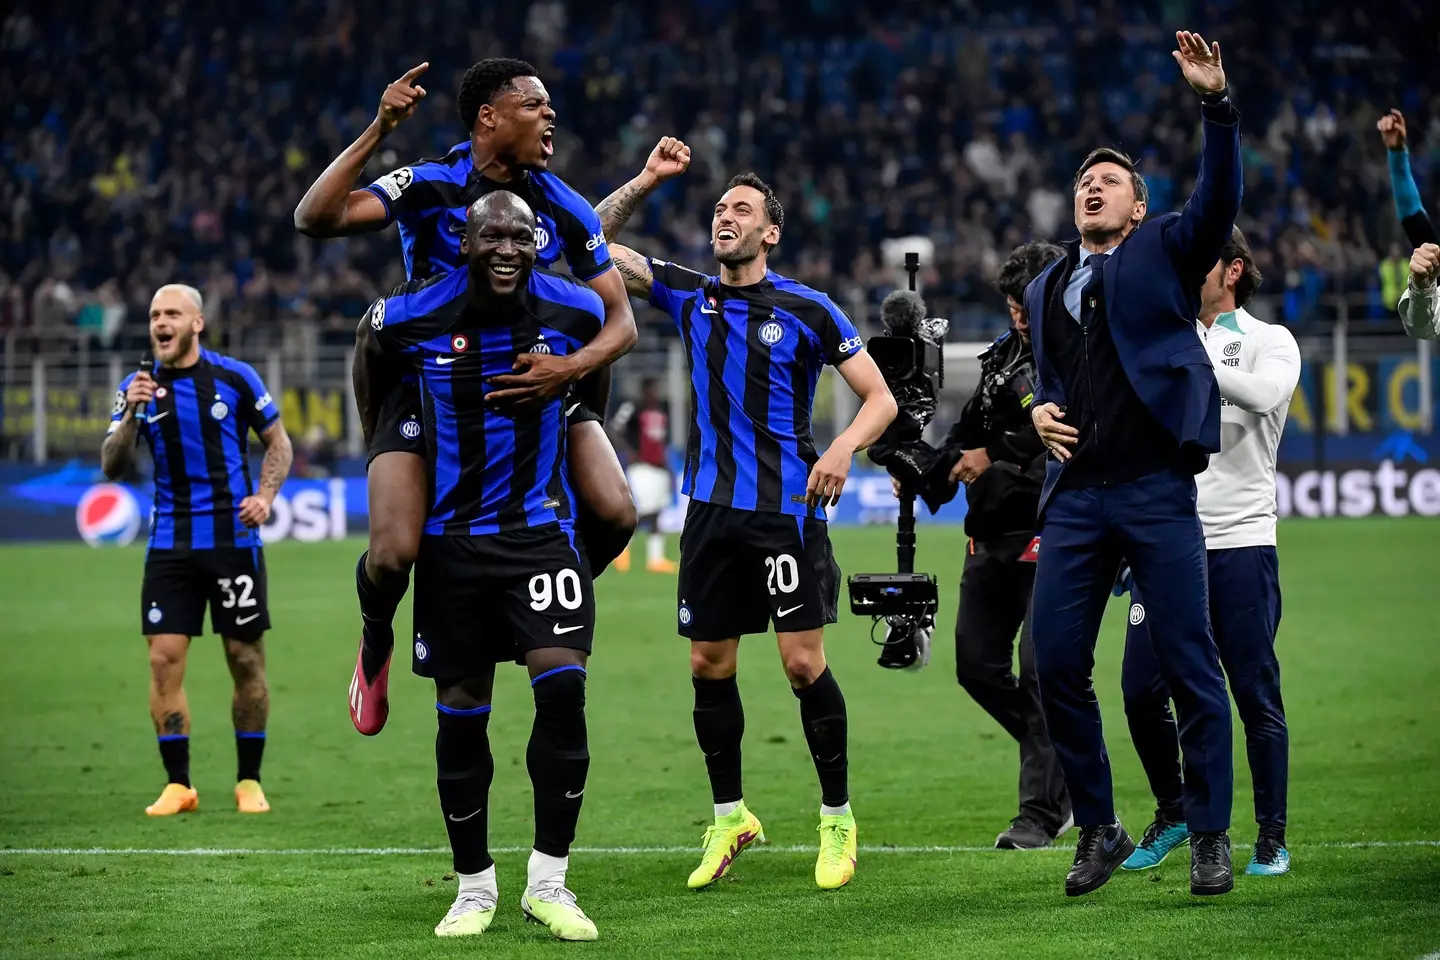 Sponsorless Inter players celebrate the win over rivals AC Milan. Image: Alamy